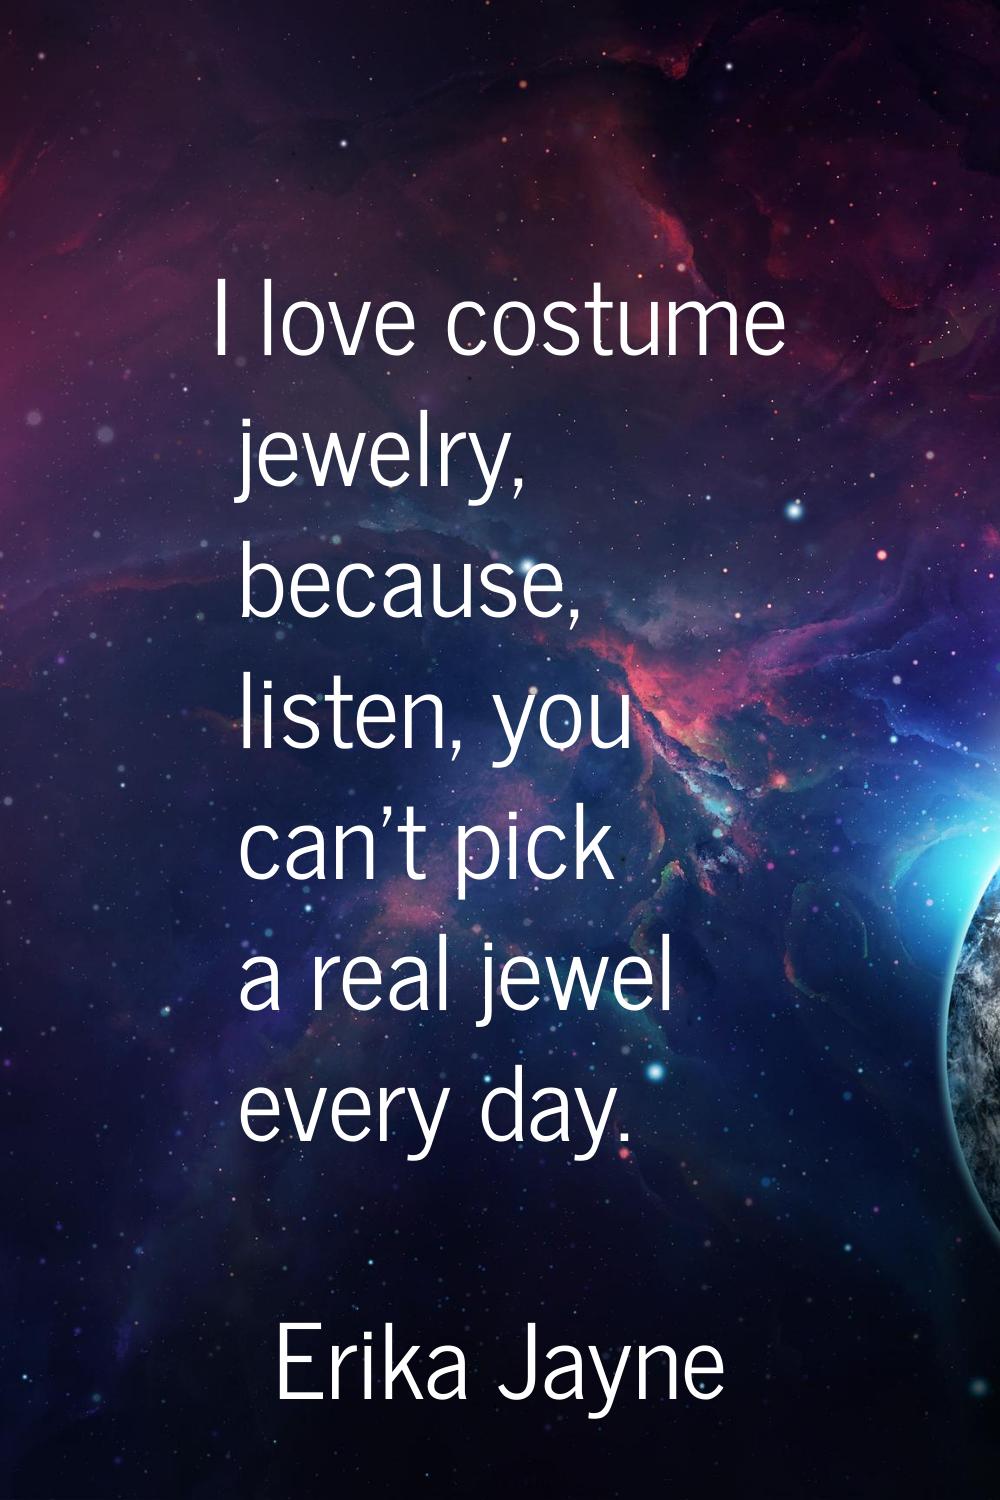 I love costume jewelry, because, listen, you can't pick a real jewel every day.